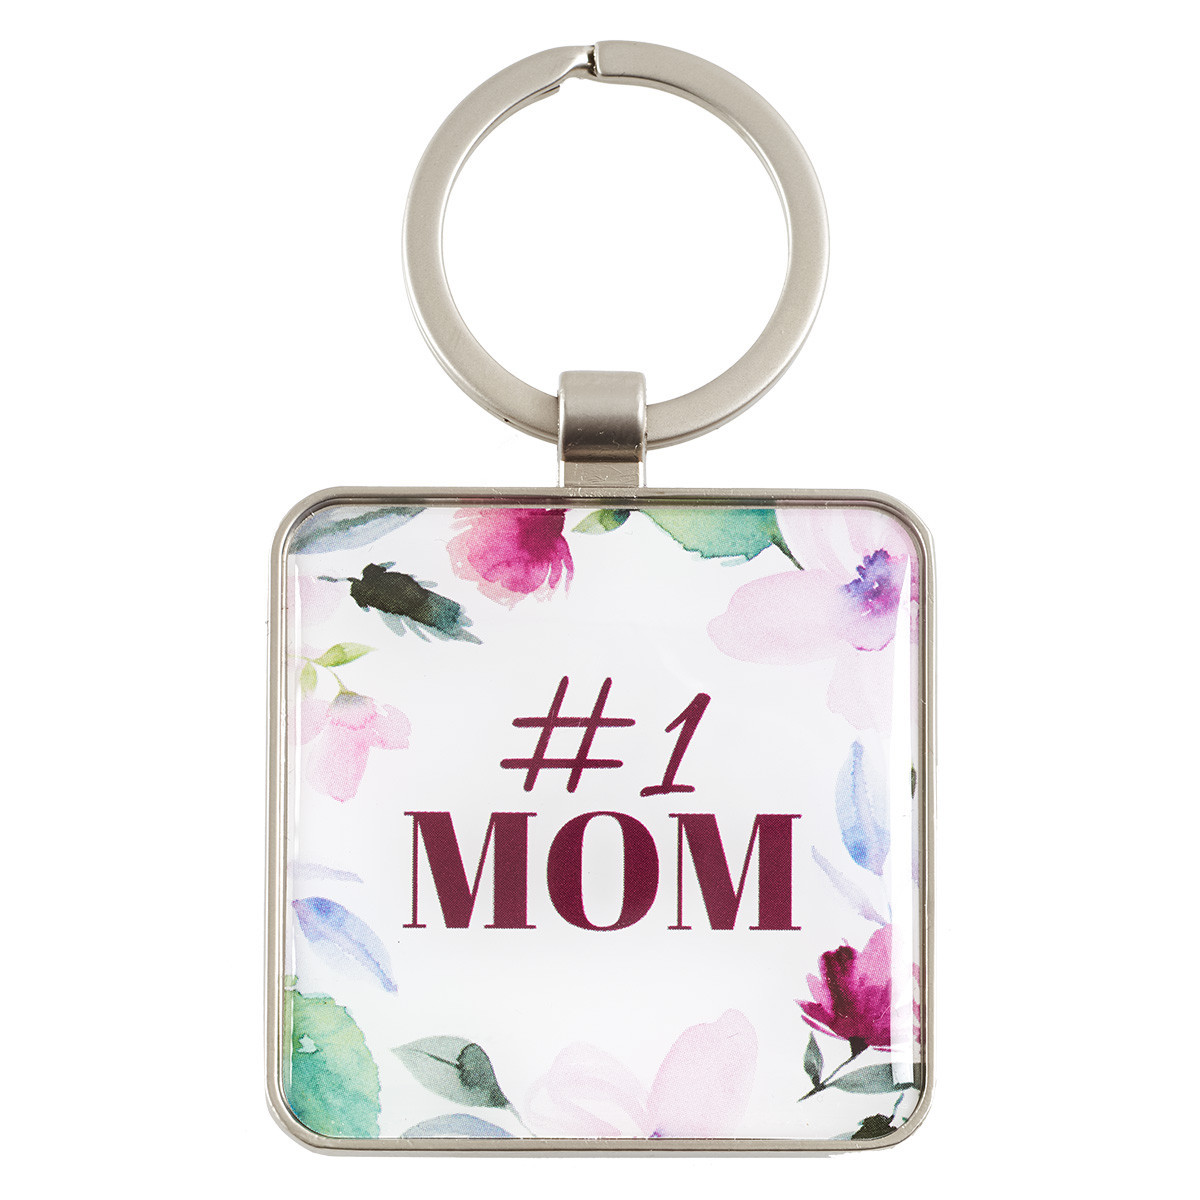 Christian Mothers Day Gifts In Bulk
 1 Mom Proverbs 31 29 Keyring